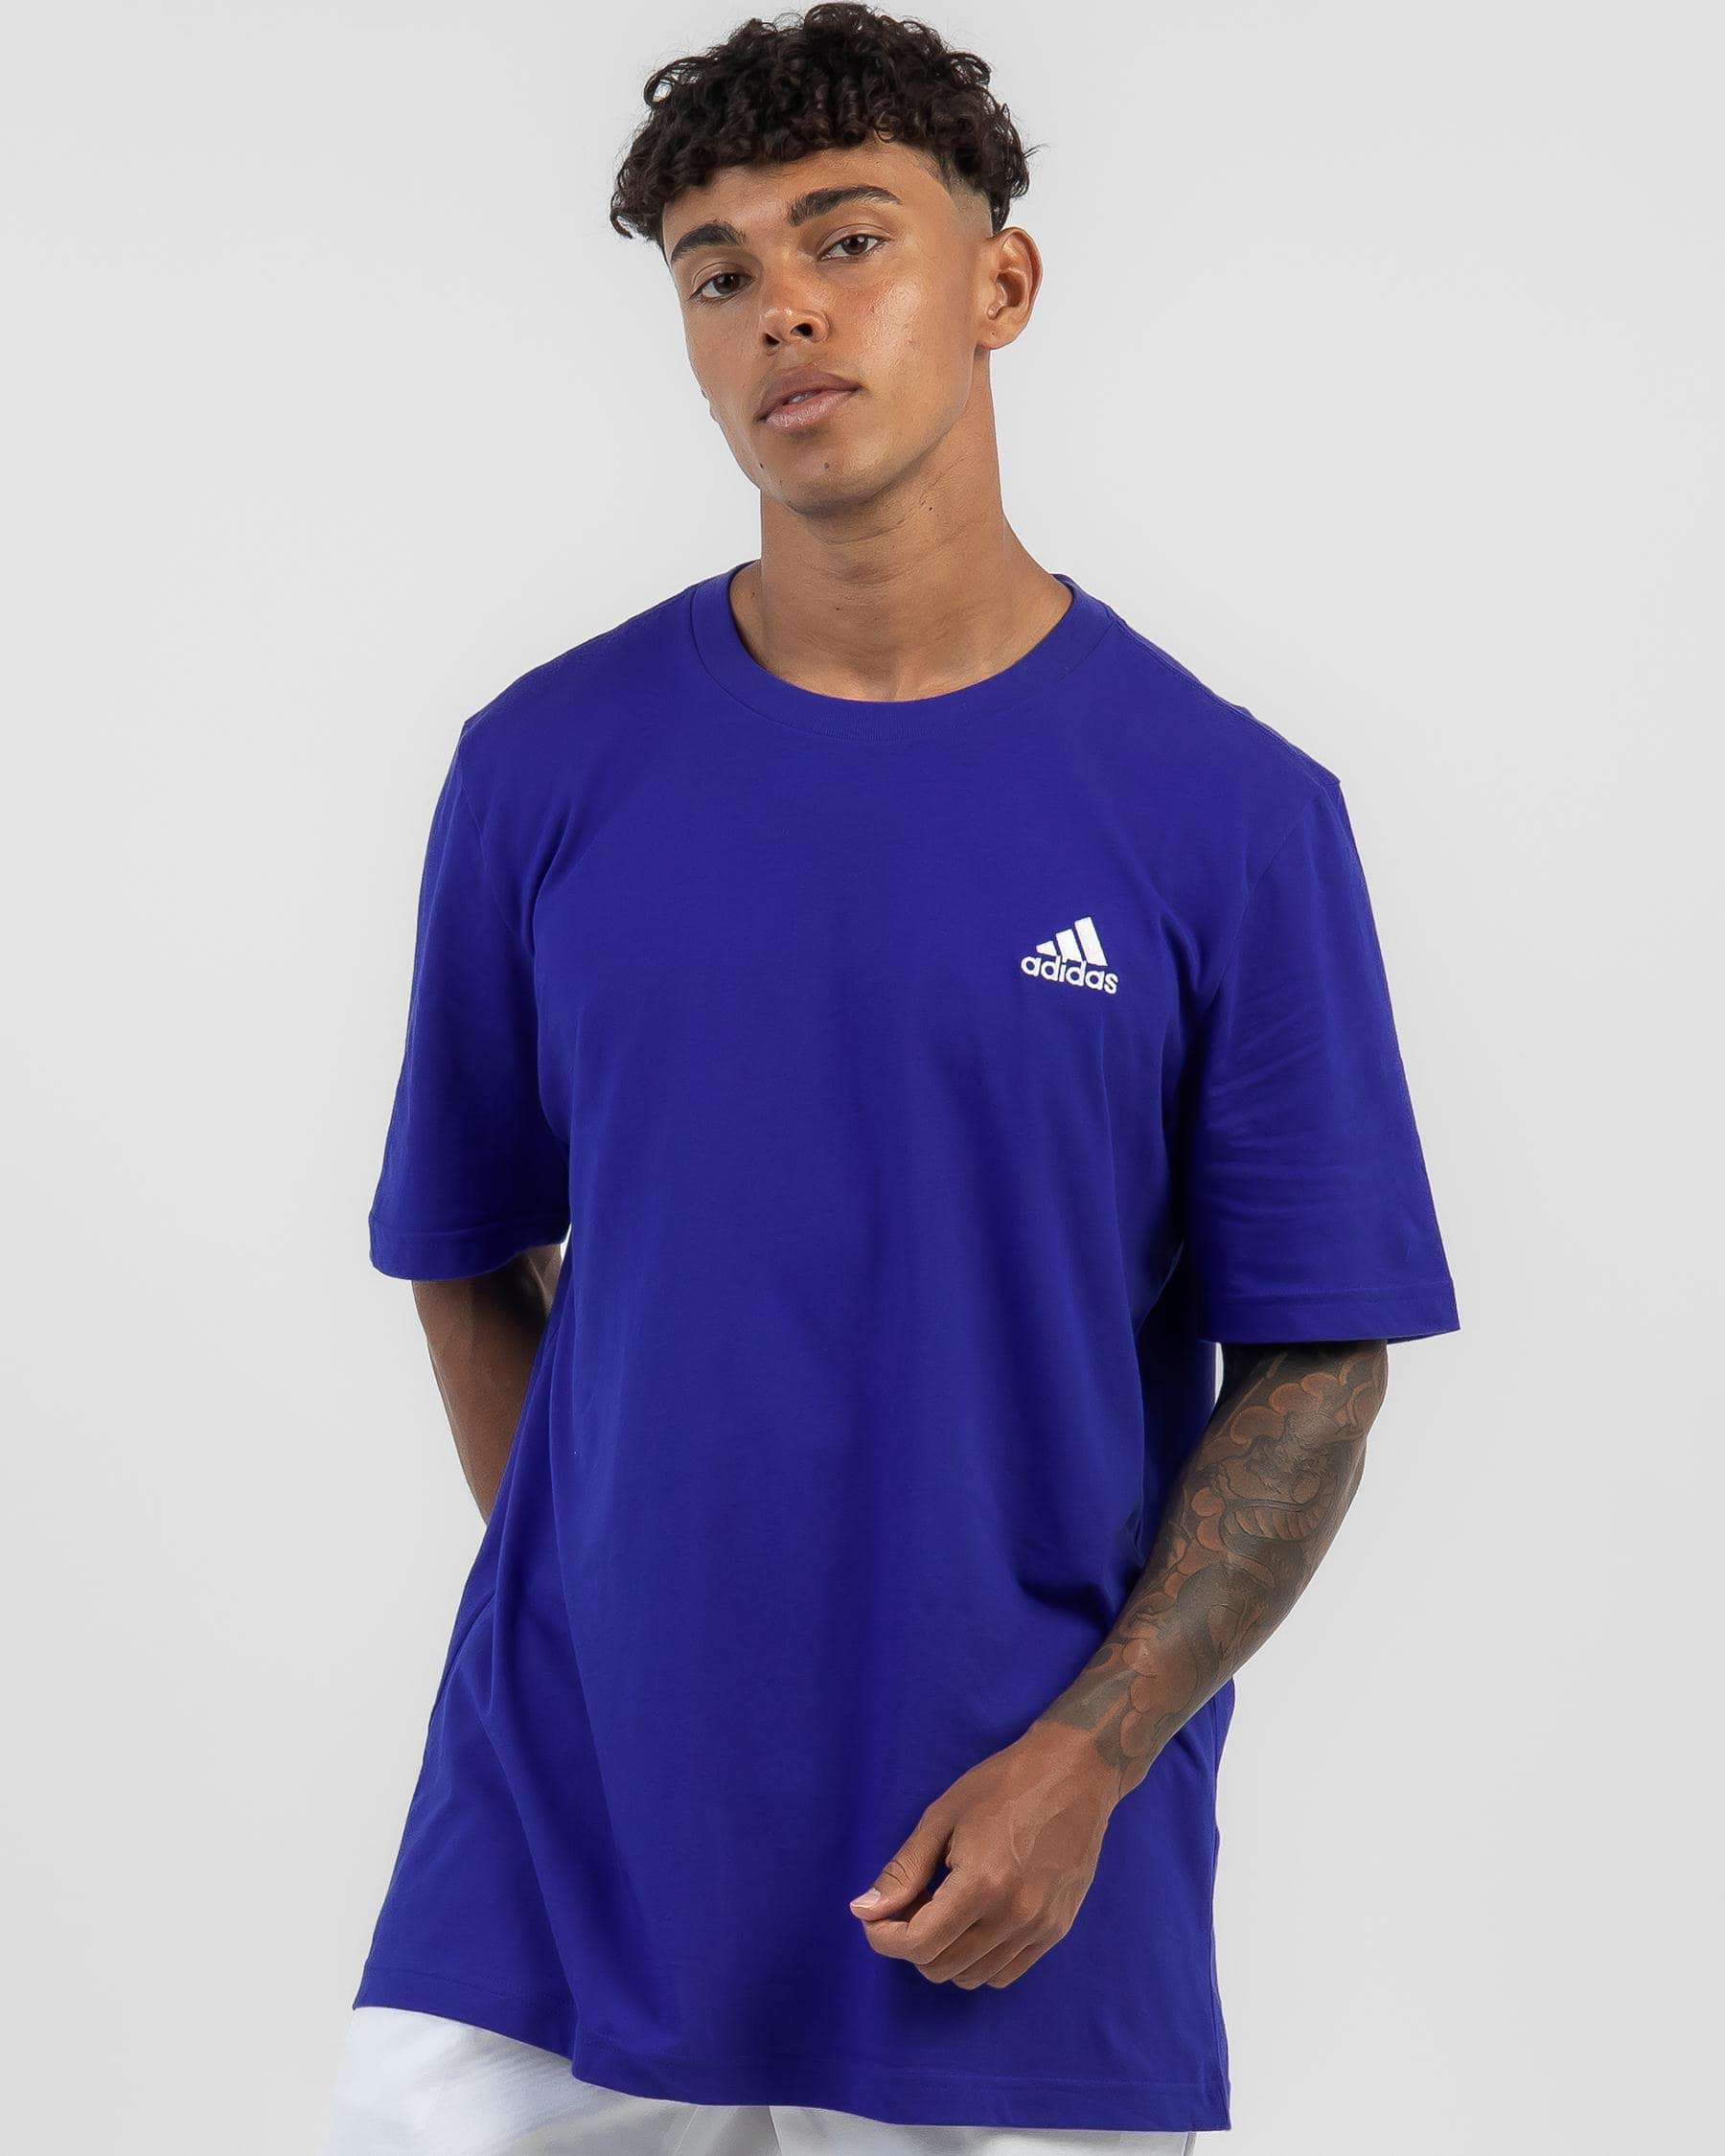 Returns Shipping FREE* City Logo - Blue Beach Semi - United Adidas Lucid T-Shirt States Easy In & Small